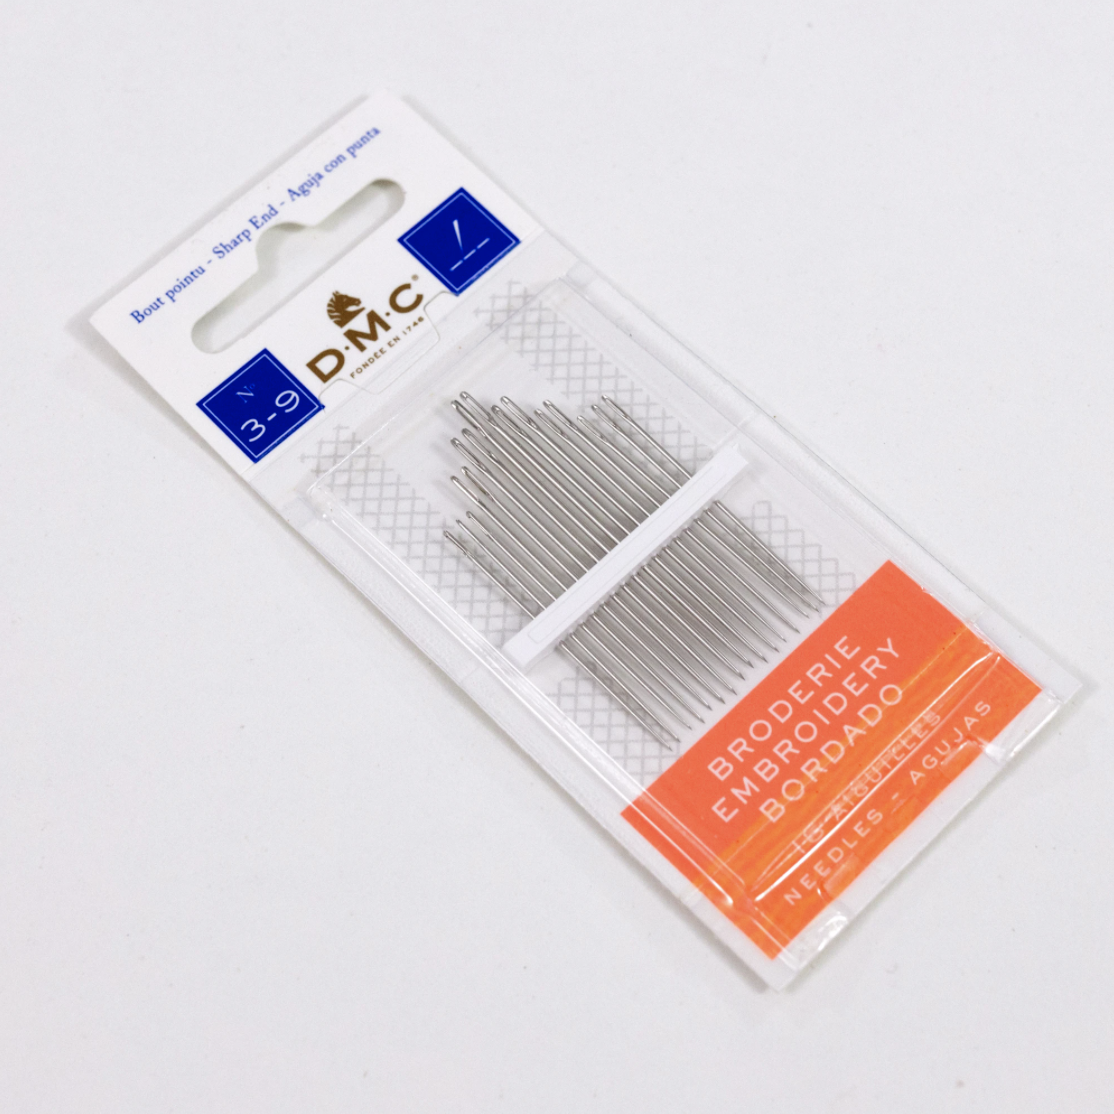 This is an image of a DMC 3-9 embroidery needle pack.